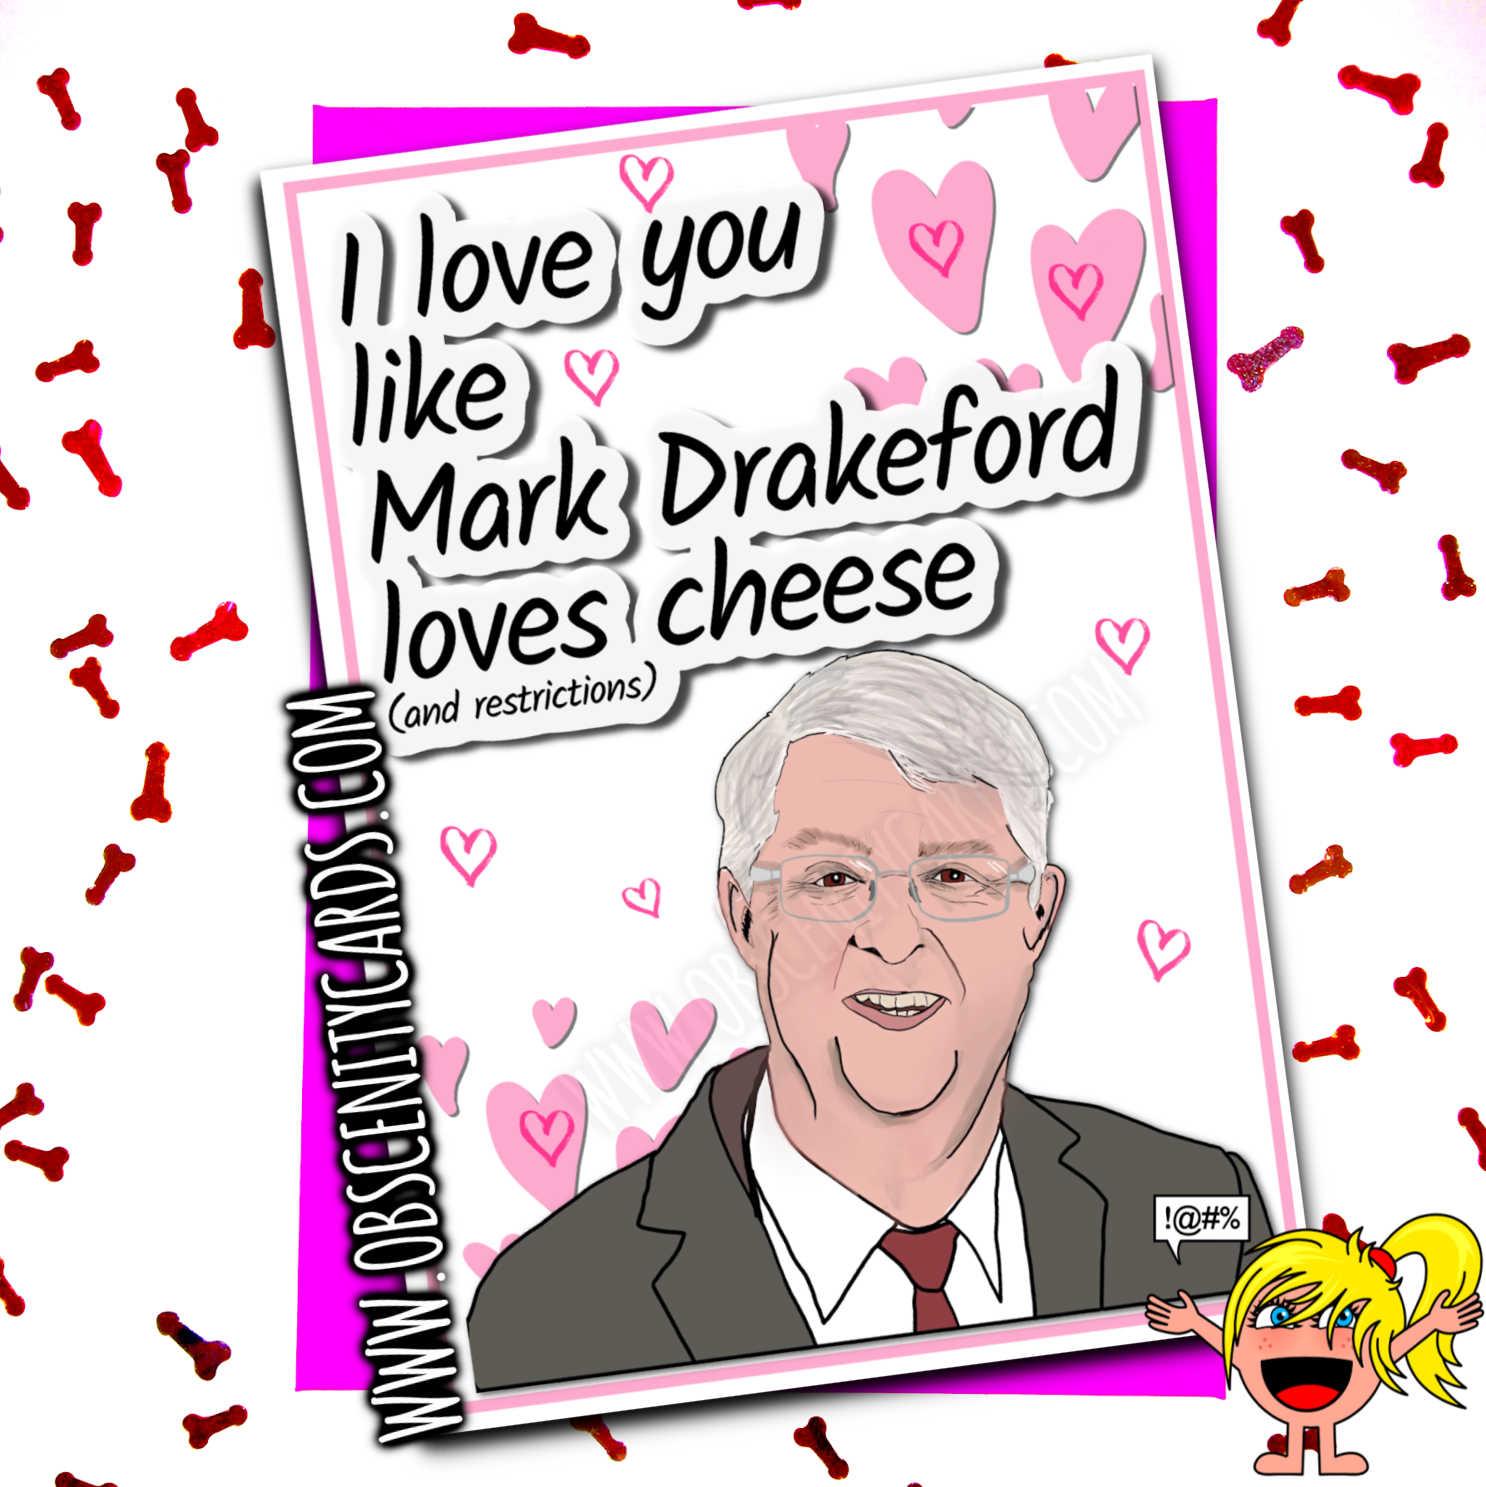 MARK DRAKEFORD WELSH MINISTER FUNNY VALENTINES ANNIVERSARY CARD LOVES CHEESE AND RESTRICTIONS